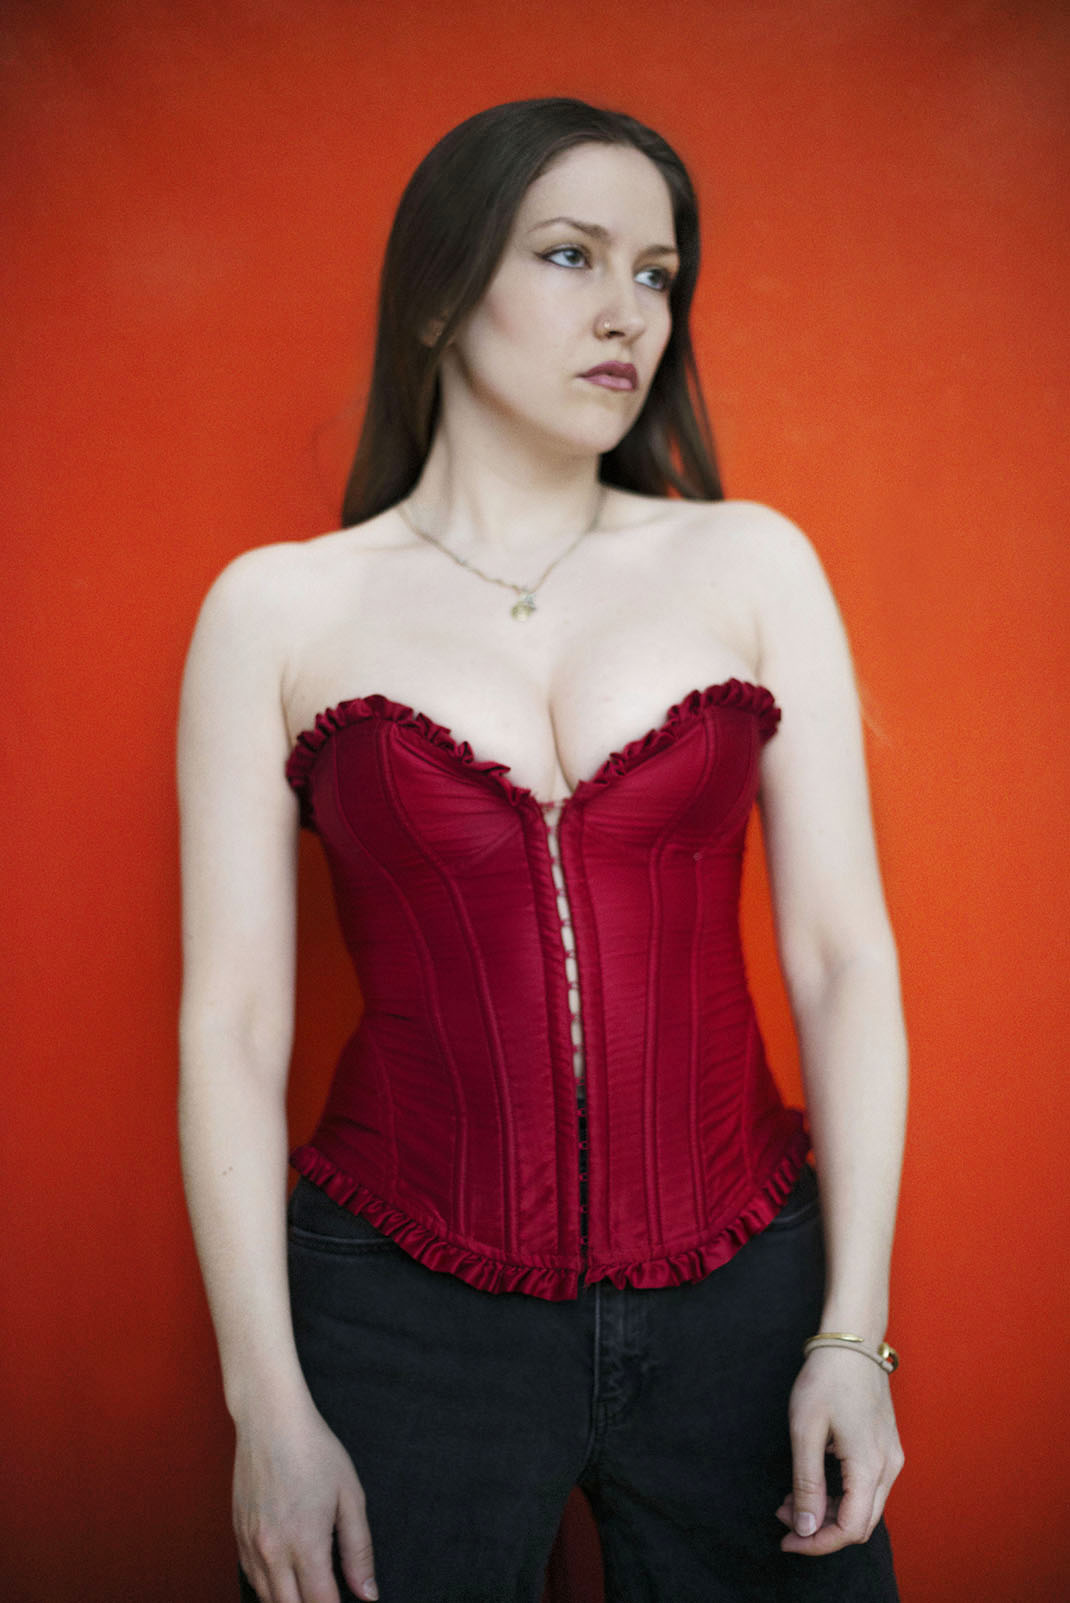 Red corset